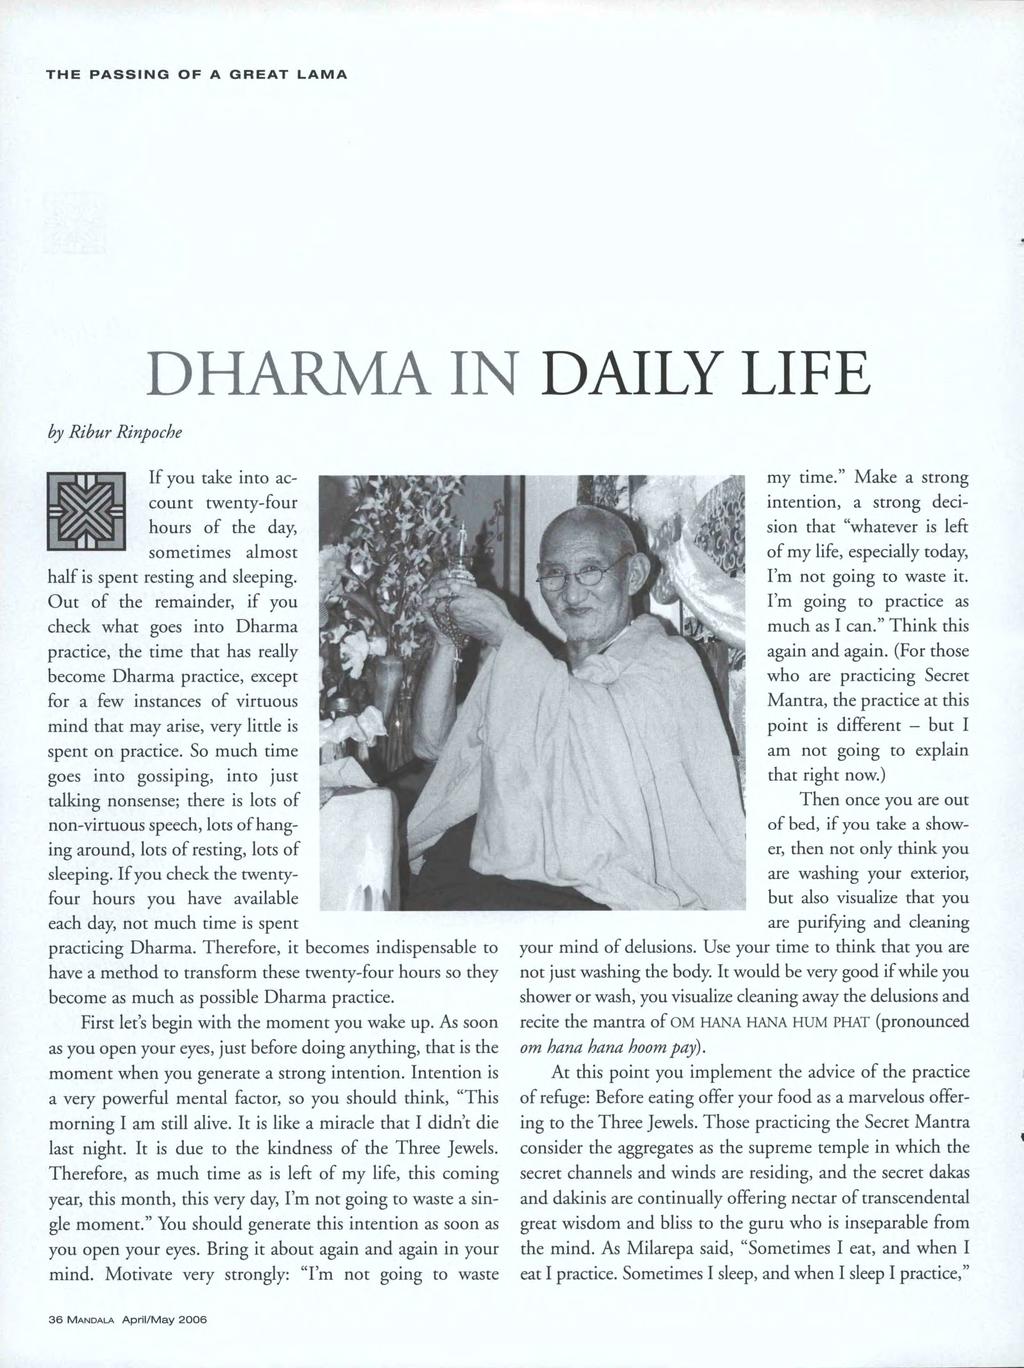 THE PASSING OF A GREAT LAMA by Ribur Rinpoche DHARMA IN DAILY LIFE If you take into account twenty-four hours of the day, sometimes almost half is spent resting and sleeping.